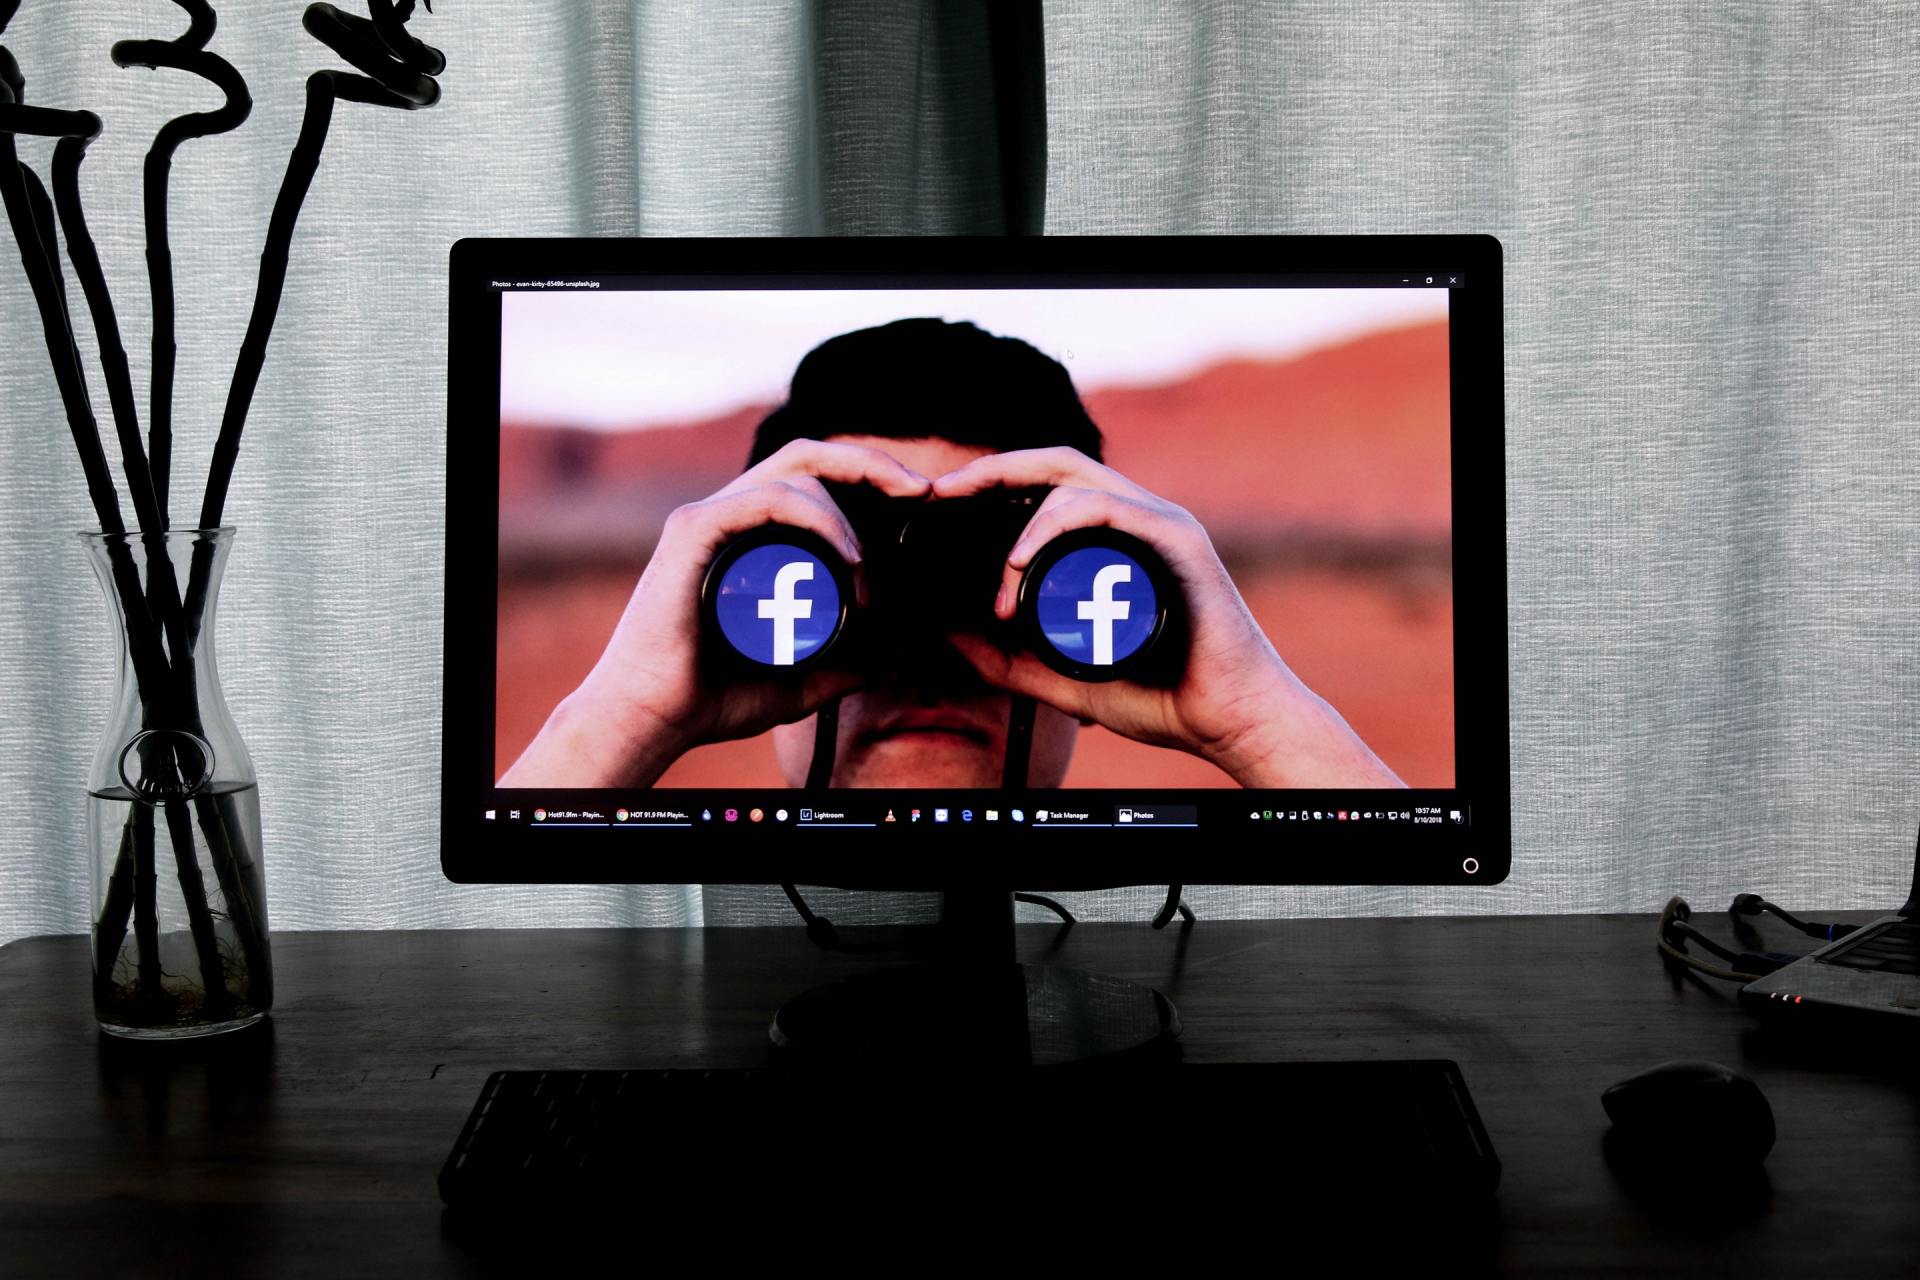 a computer monitor shows a man looking through binoculars with a facebook logo on the screen .